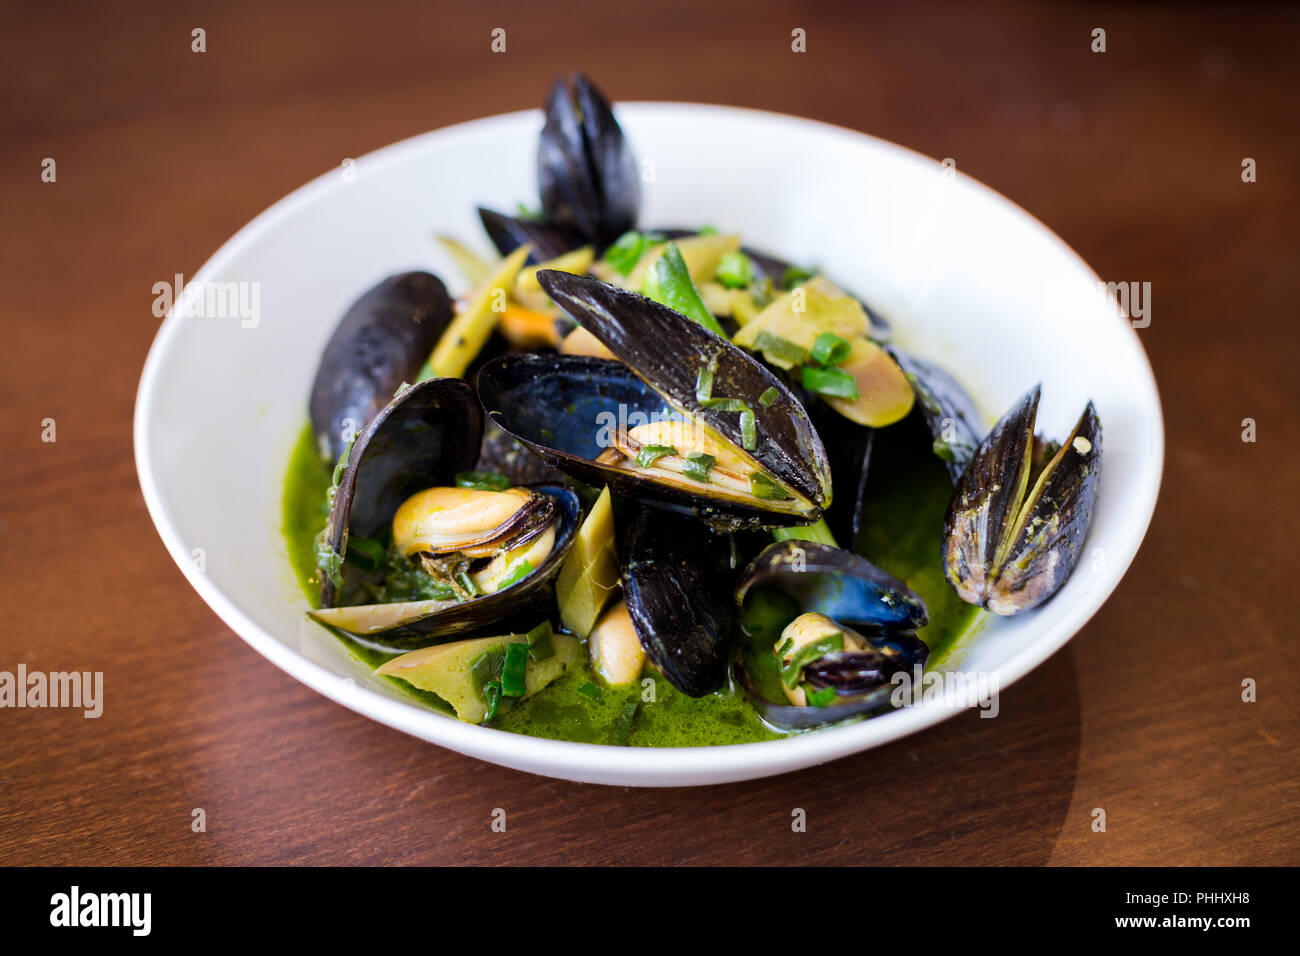 Mussels in shells in a white bowl with a green sauce on a dining table. Stock Photo